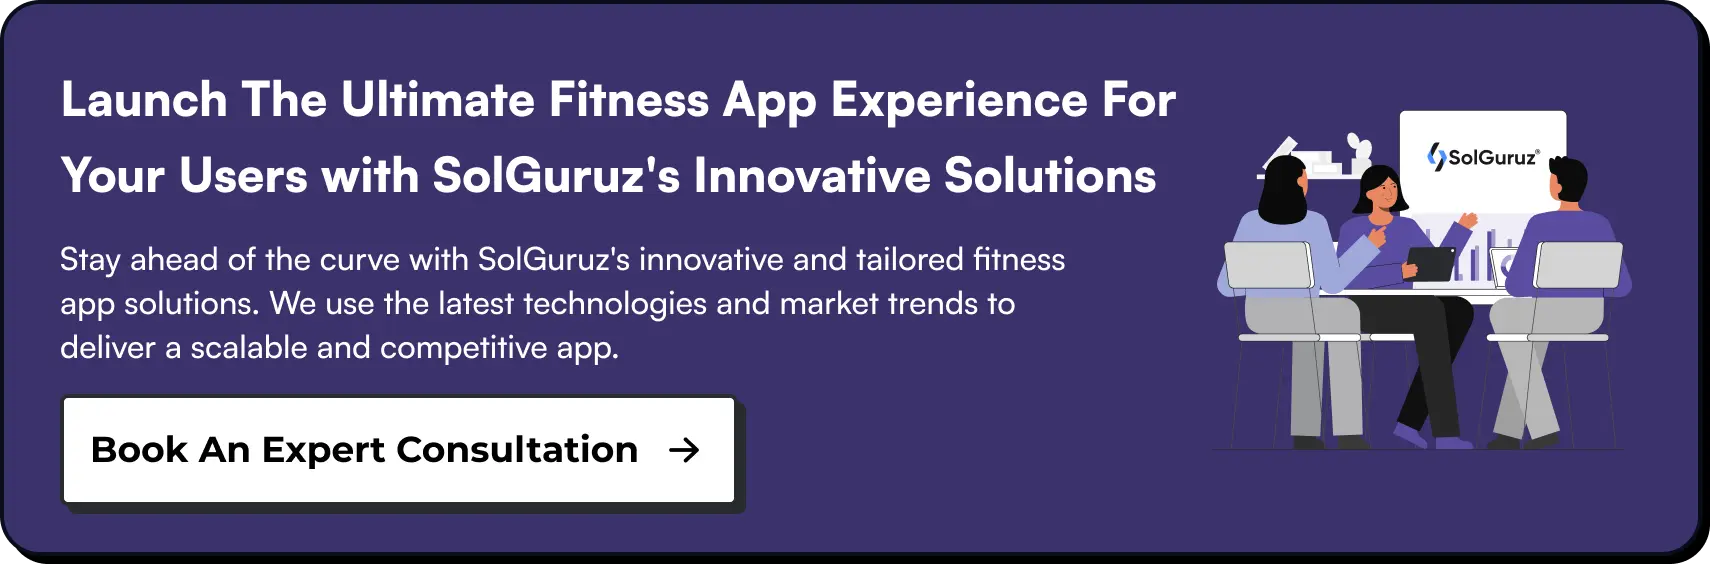 Launch The Ultimate Fitness App Experience For Your Users with SolGuruz's Innovative Solutions. Stay ahead of the curve with SolGuruz's innovative and tailored fitness app solutions. We use the latest technologies and market trends to deliver a scalable and competitive app.